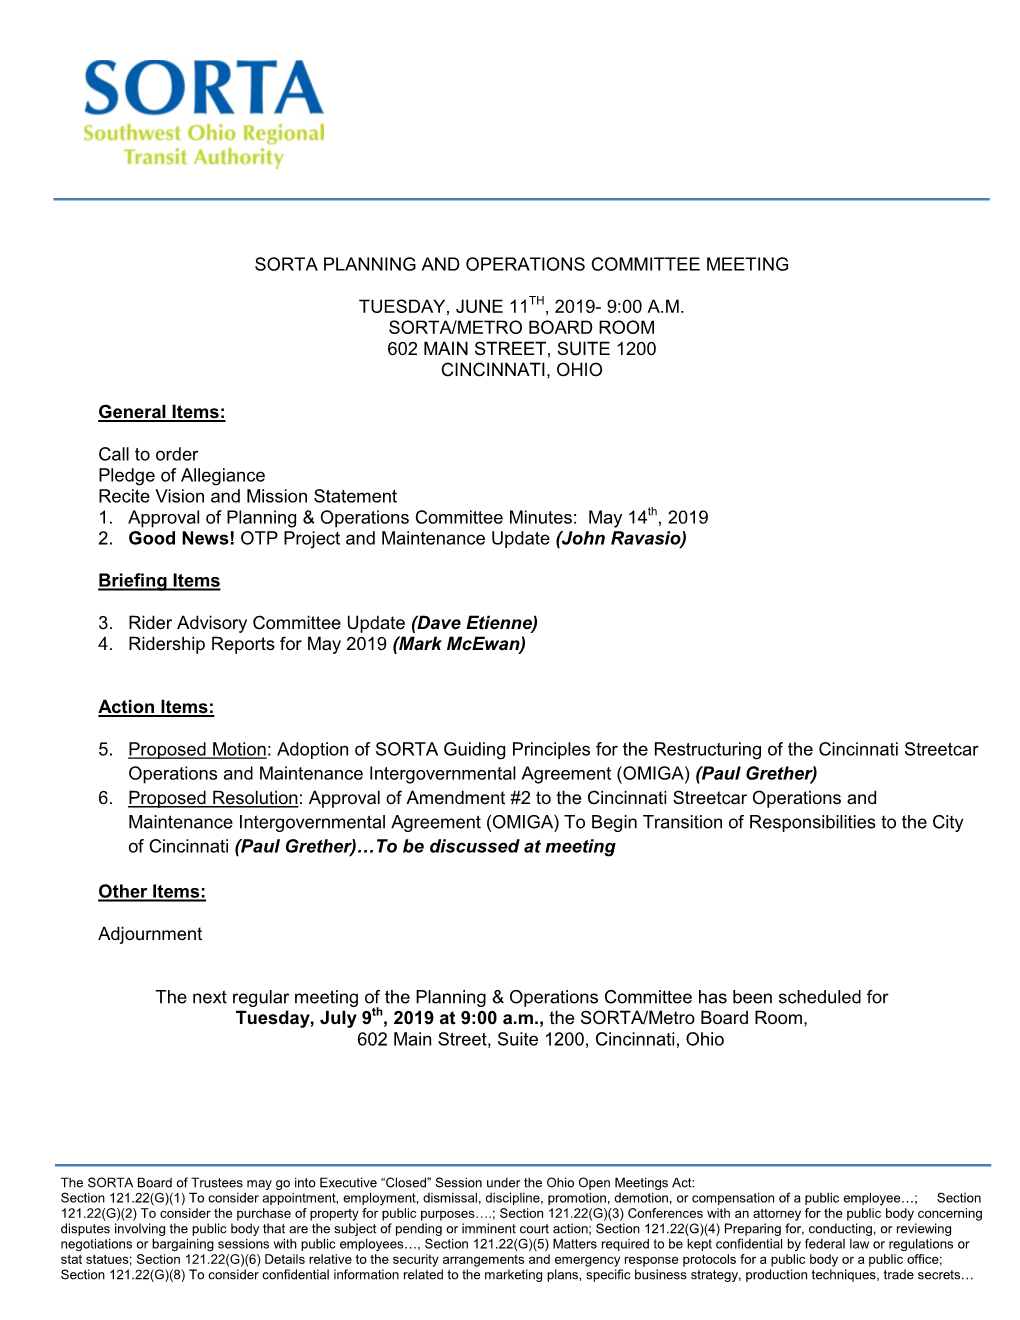 Sorta Planning and Operations Committee Meeting Tuesday, June 11Th, 2019- 9:00 A.M. Sorta/Metro Board Room 602 Main Street, Suit